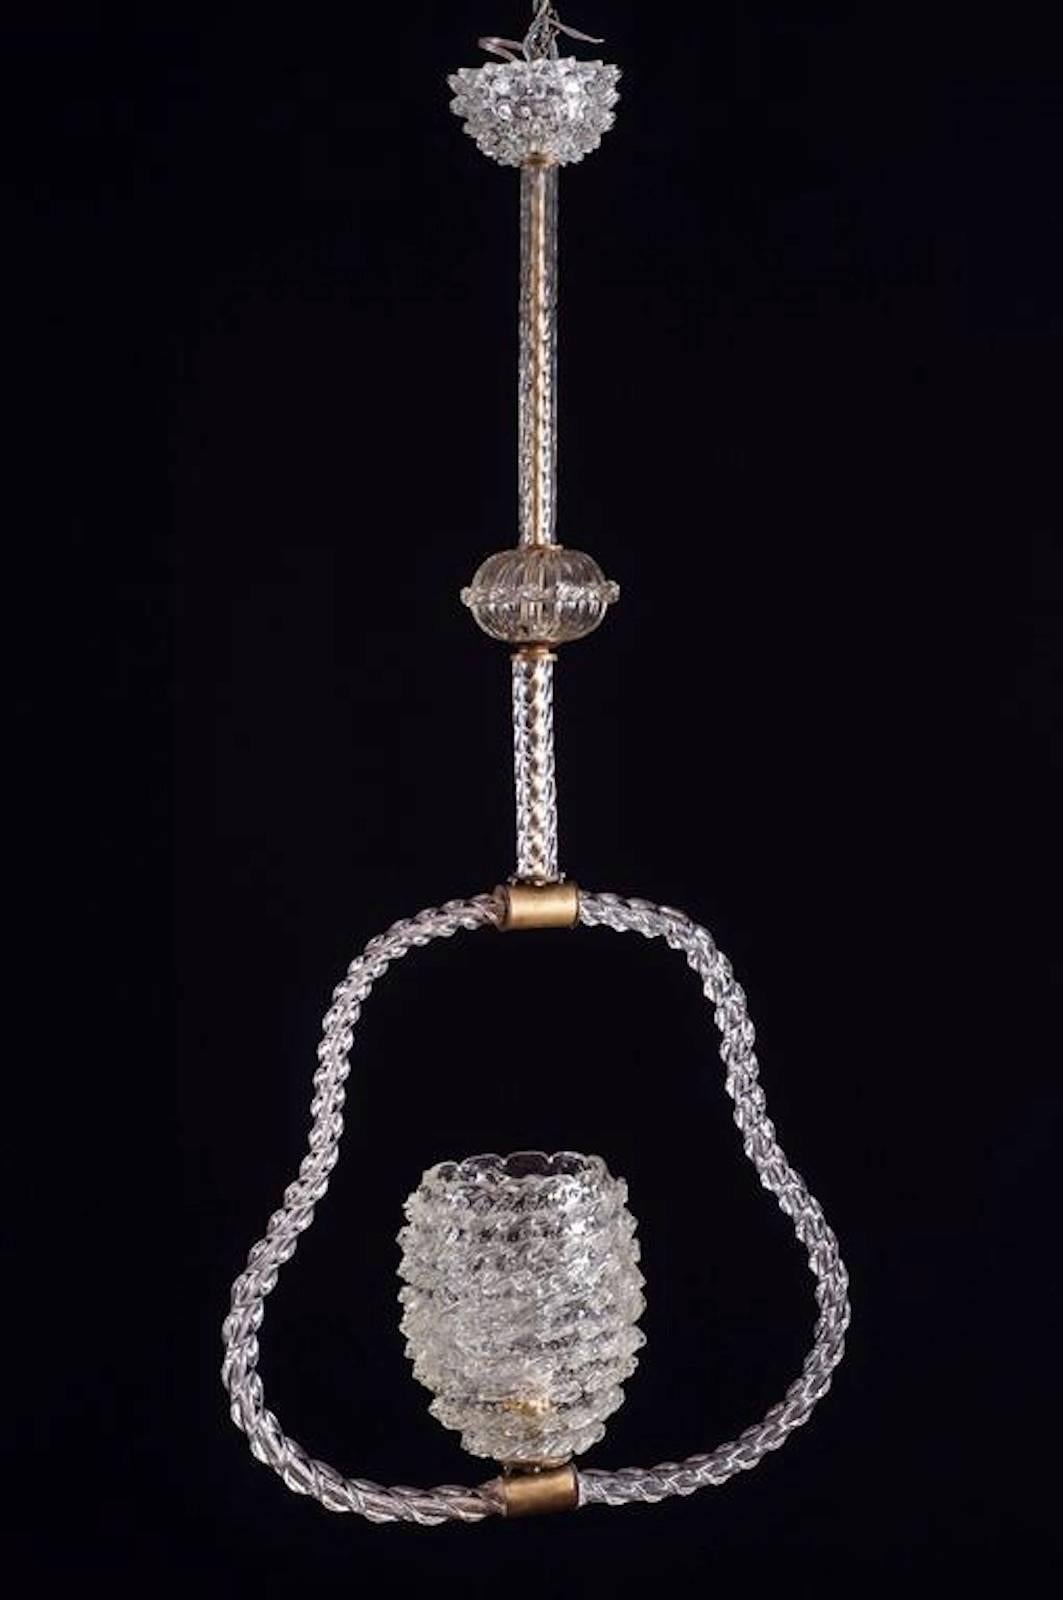 Pendant by Ercole Barovier, 1940s. From private Baron Von Plant collection.